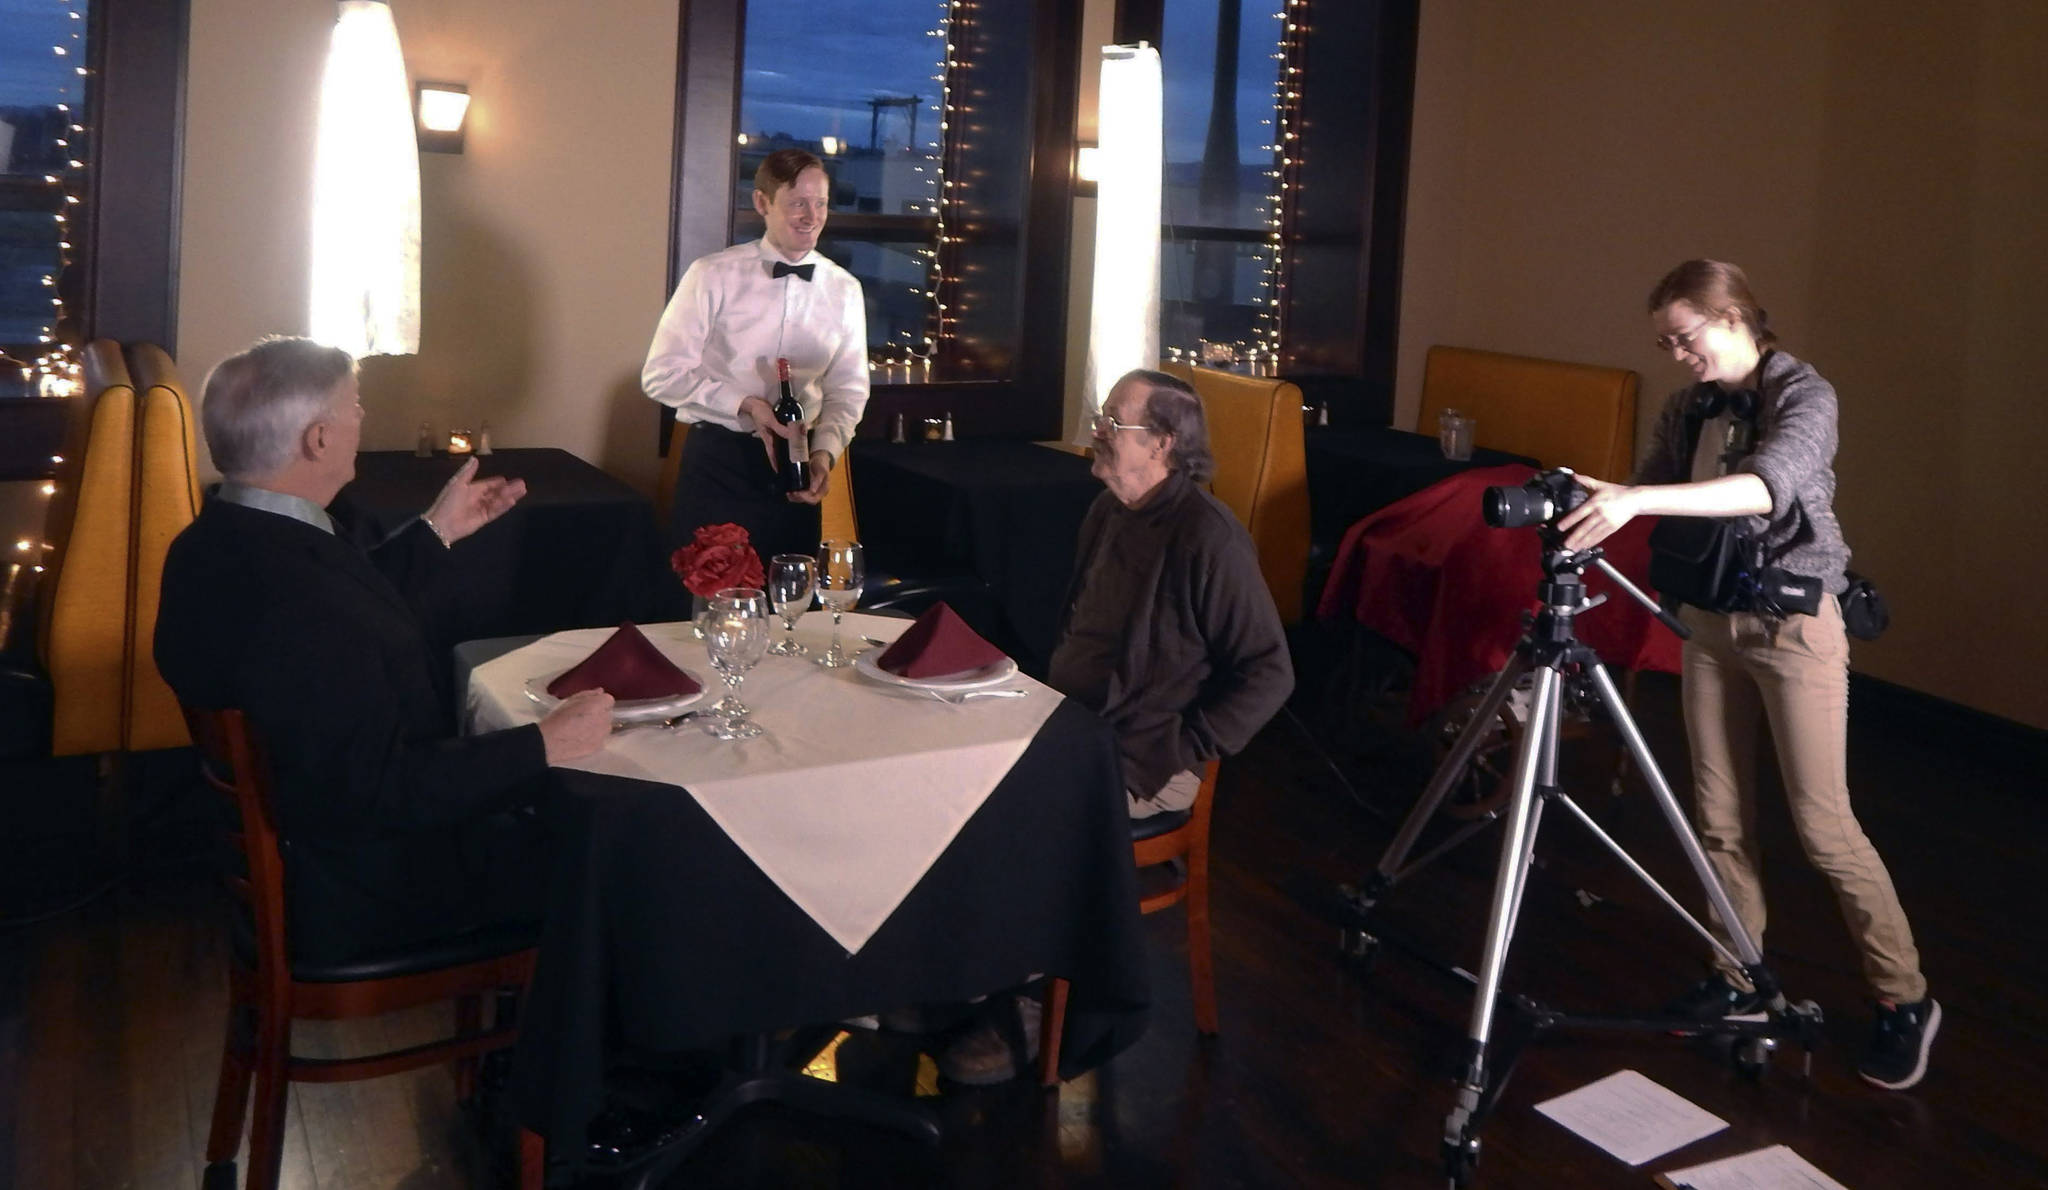 (Courtesy photo) Aria films a scene at the former Cortese’s restaurant in Aberdeen, with Cal Hastings (played by Russell Wiitala), left, and Frank Blakely (Bob Parks) being served by JR Morgan as the waiter.